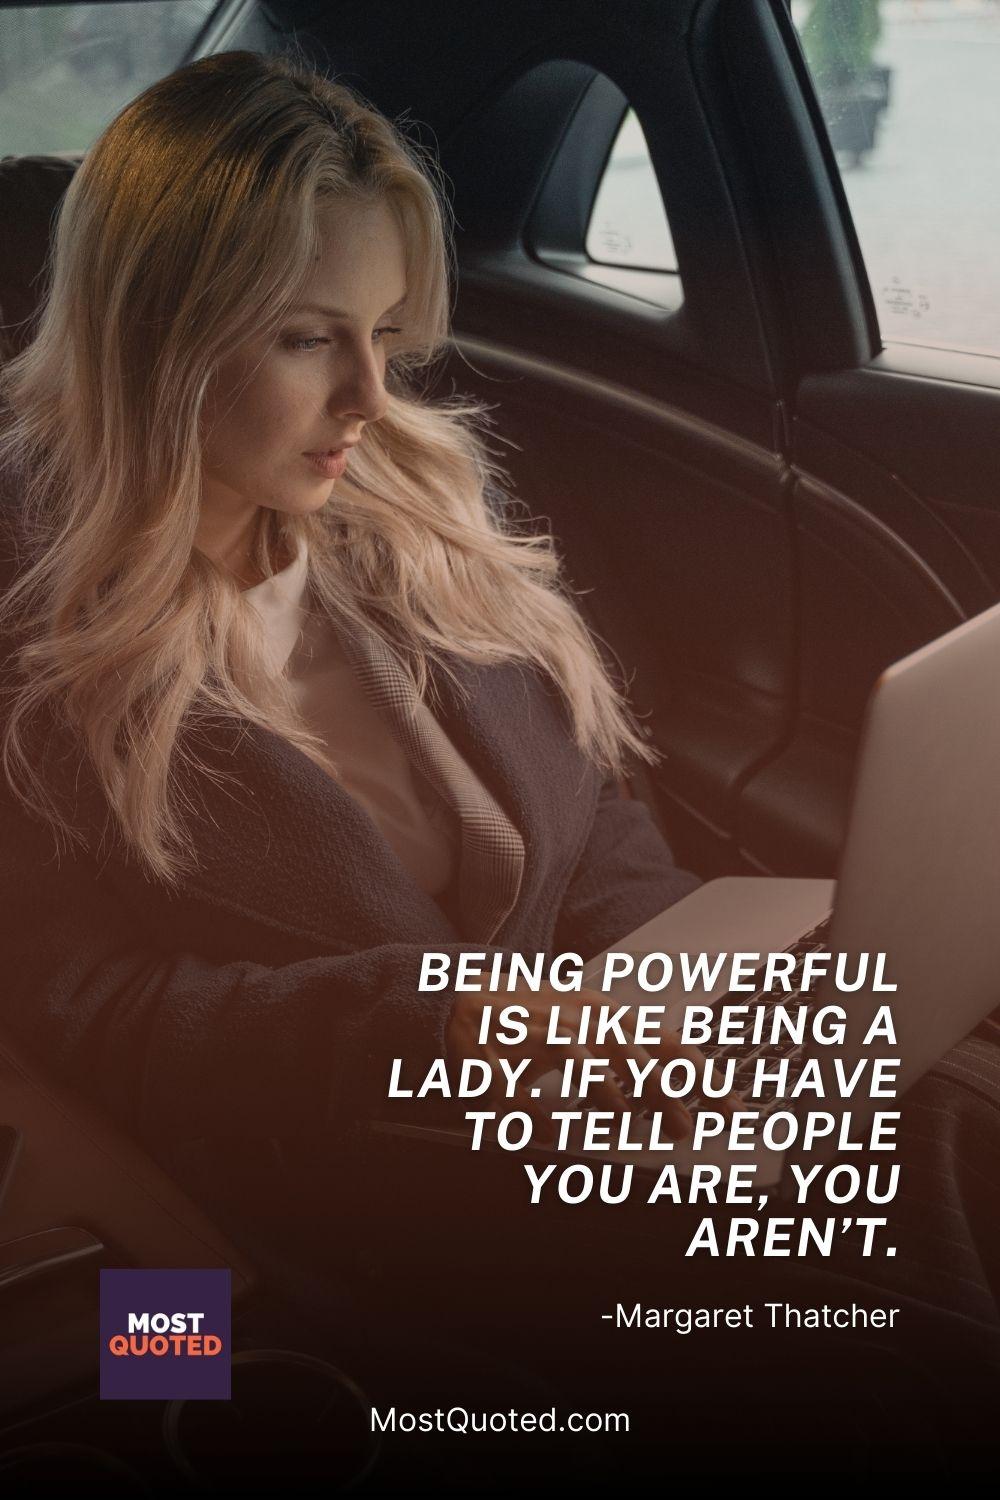 Being powerful is like being a lady. If you have to tell people you are, you aren’t. - Margaret Thatcher